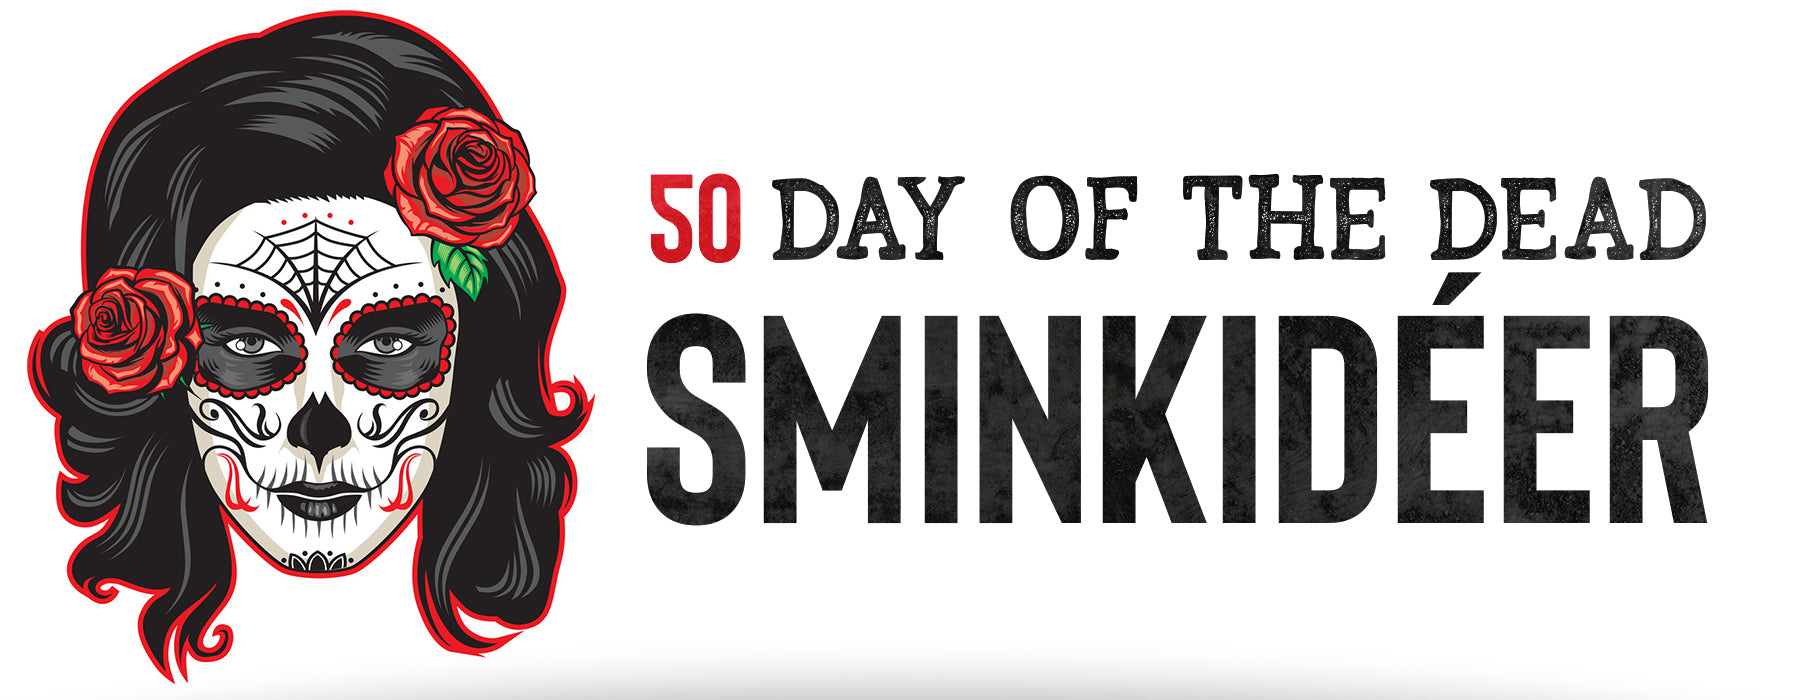 50 Day Of The Dead Sminkidéer